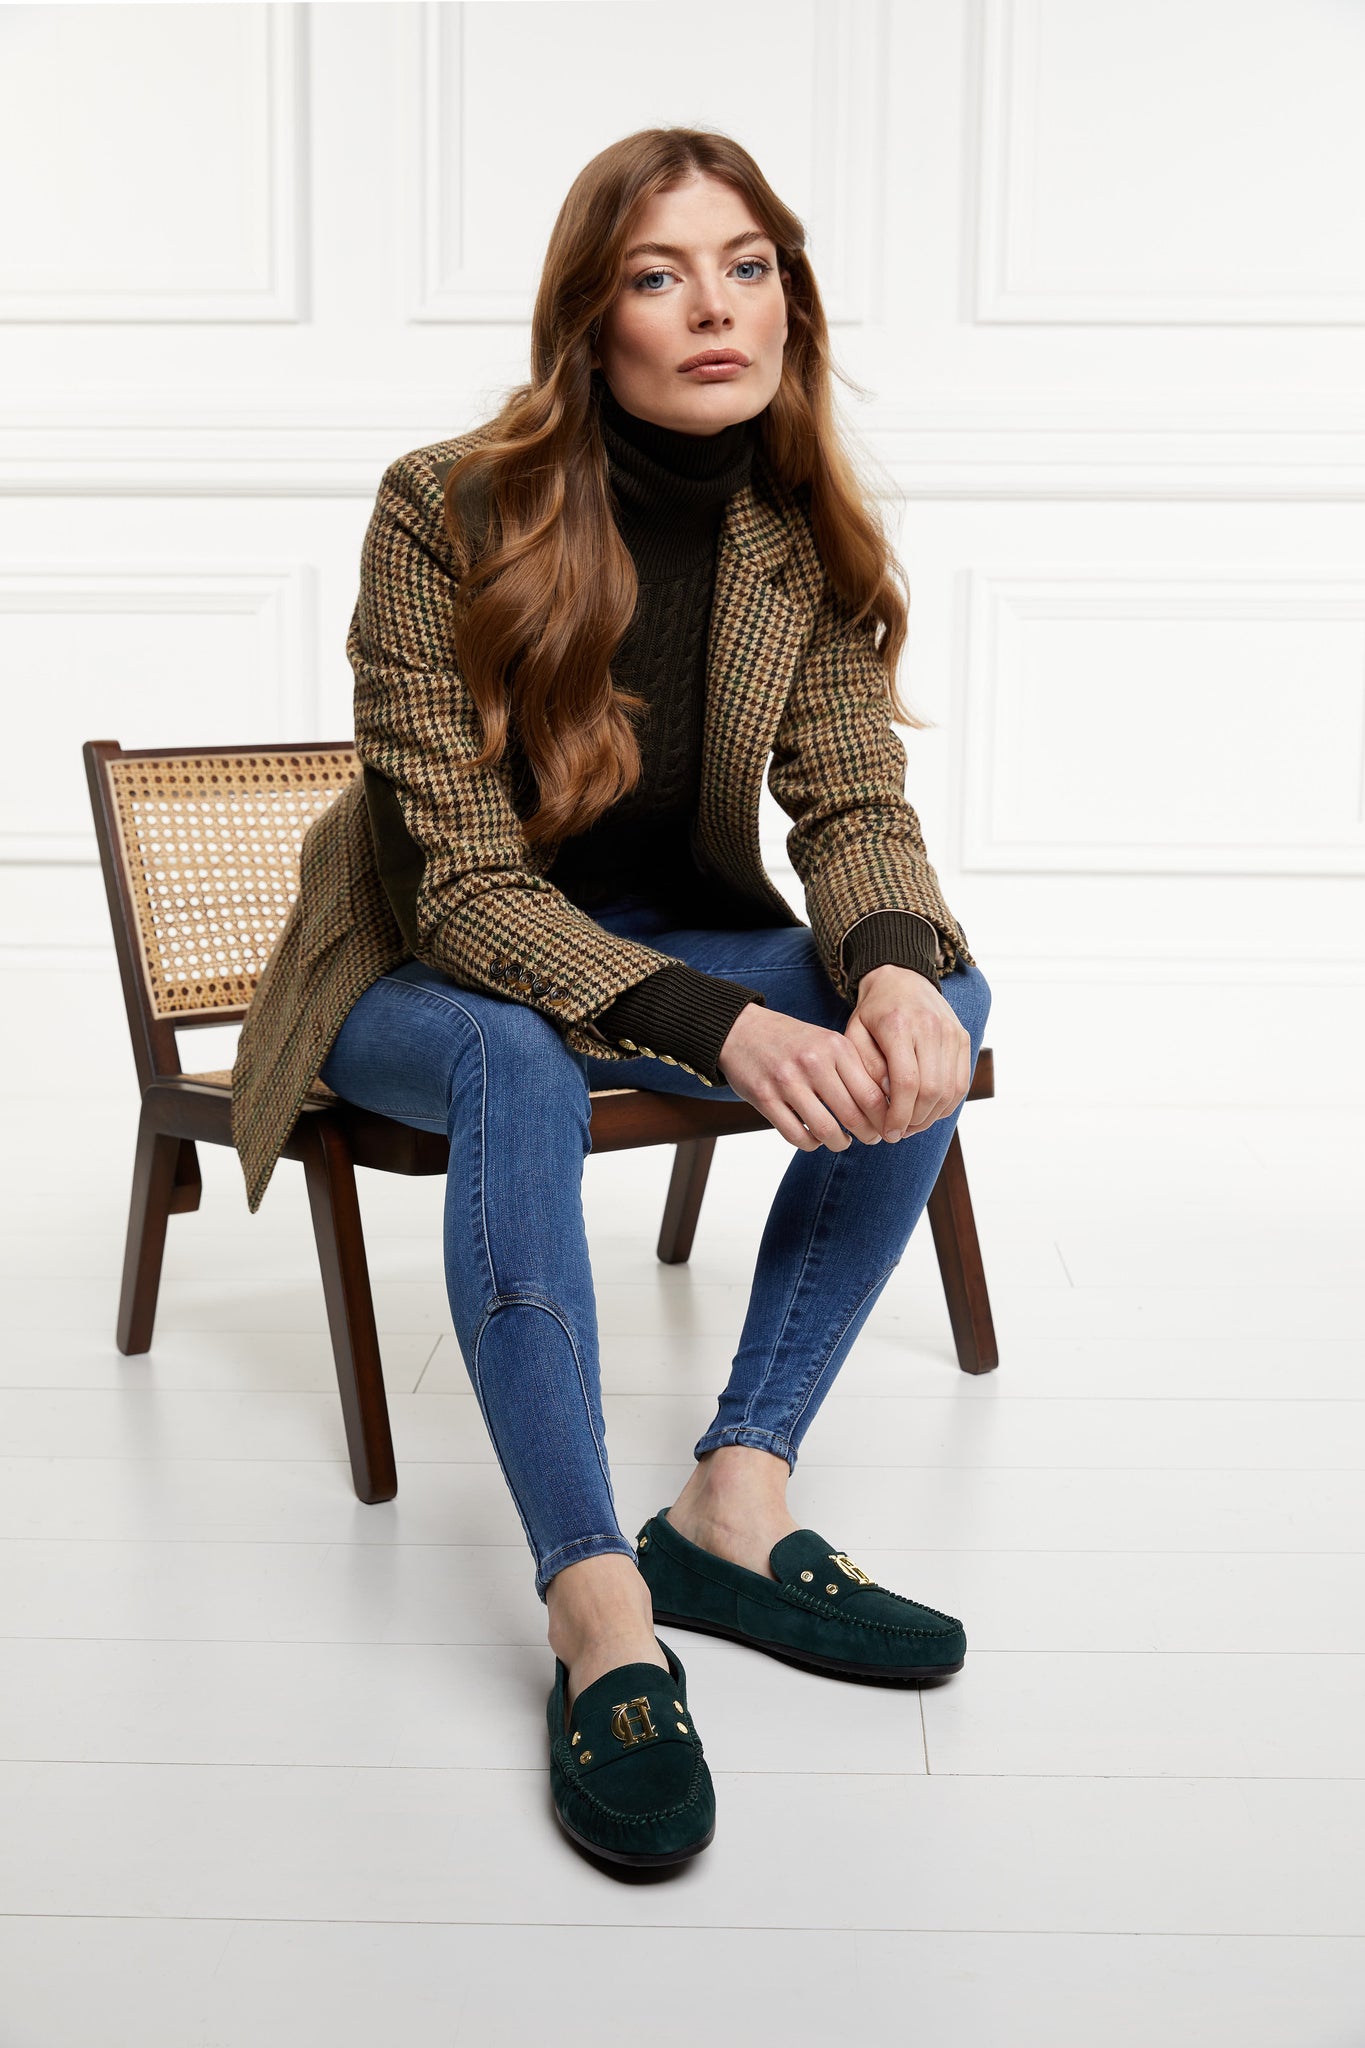 classic emerald green suede loafers with a leather sole and top stitching details and gold hardware paired with a classic denim skinny jean, dark green cable knit roll neck jumper and a green checked blazer